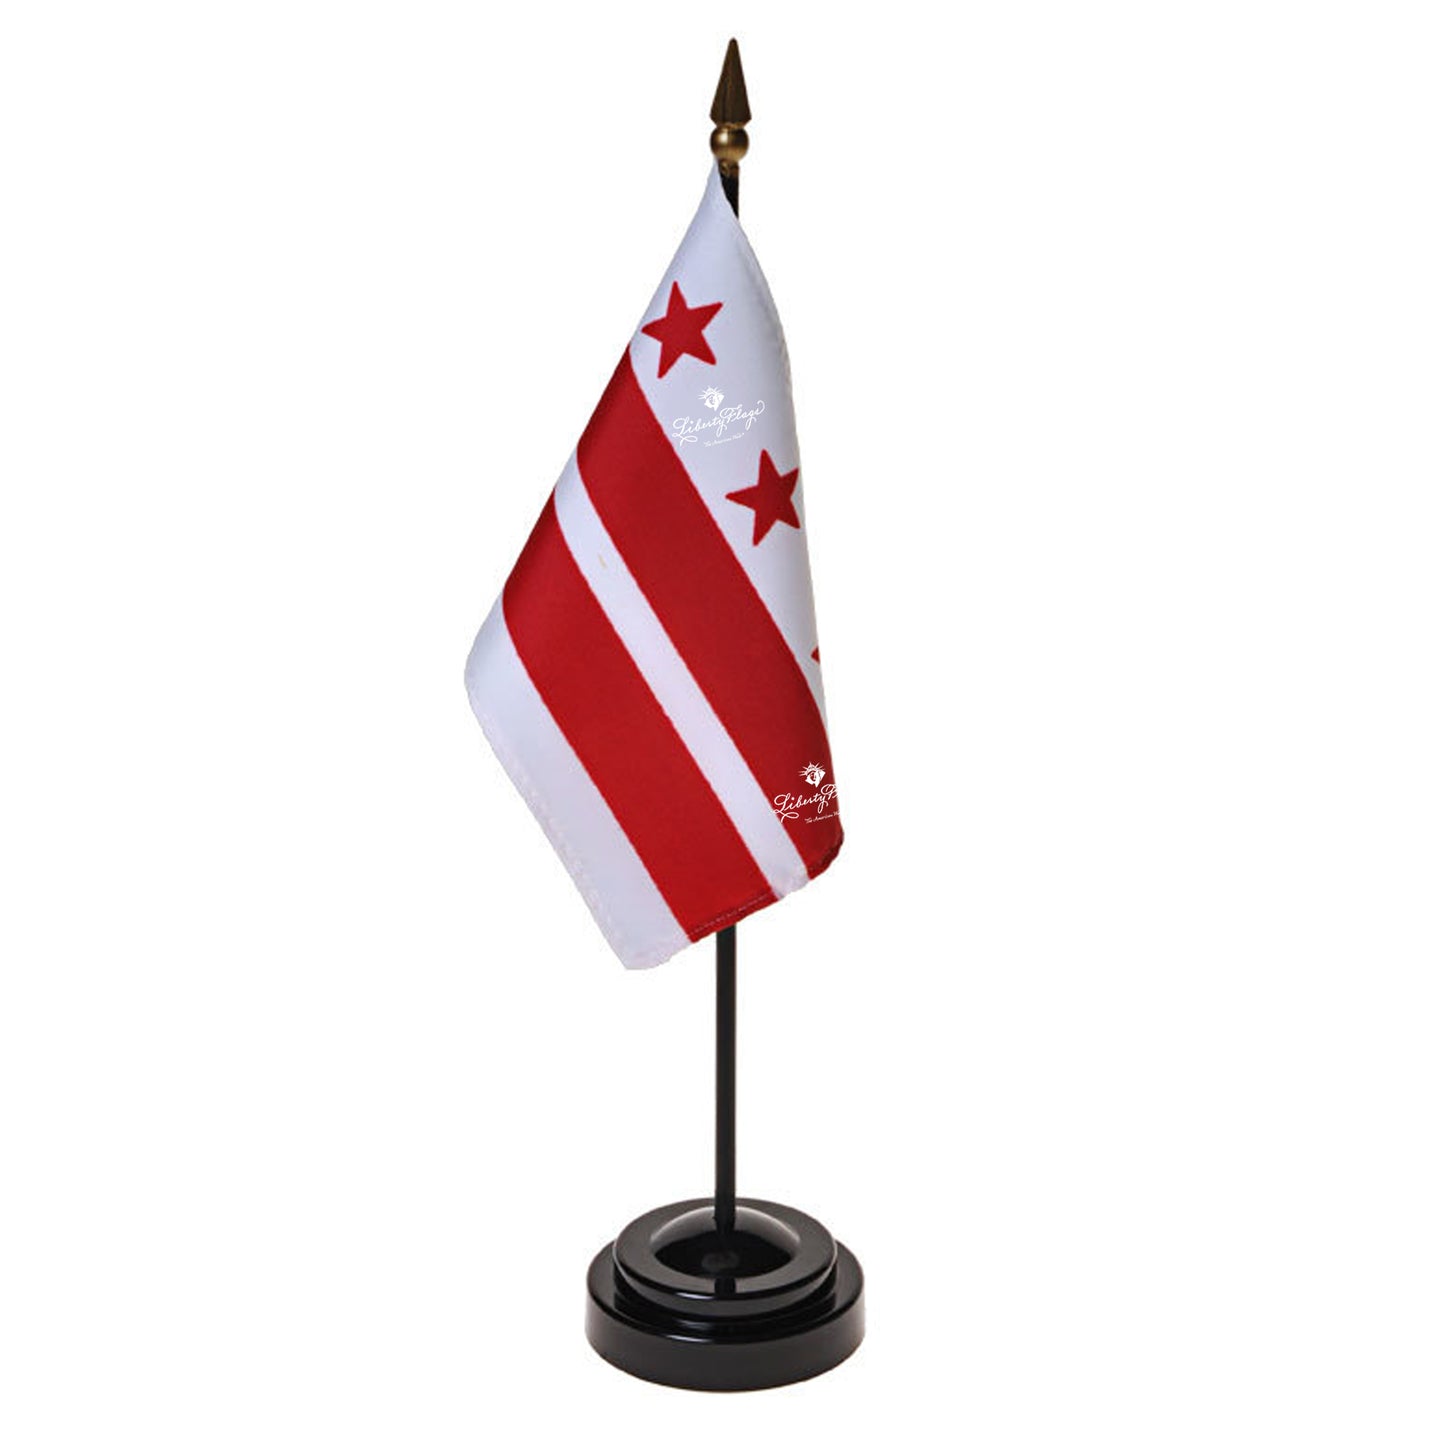 District of Columbia Small Flags - Washington D.C.